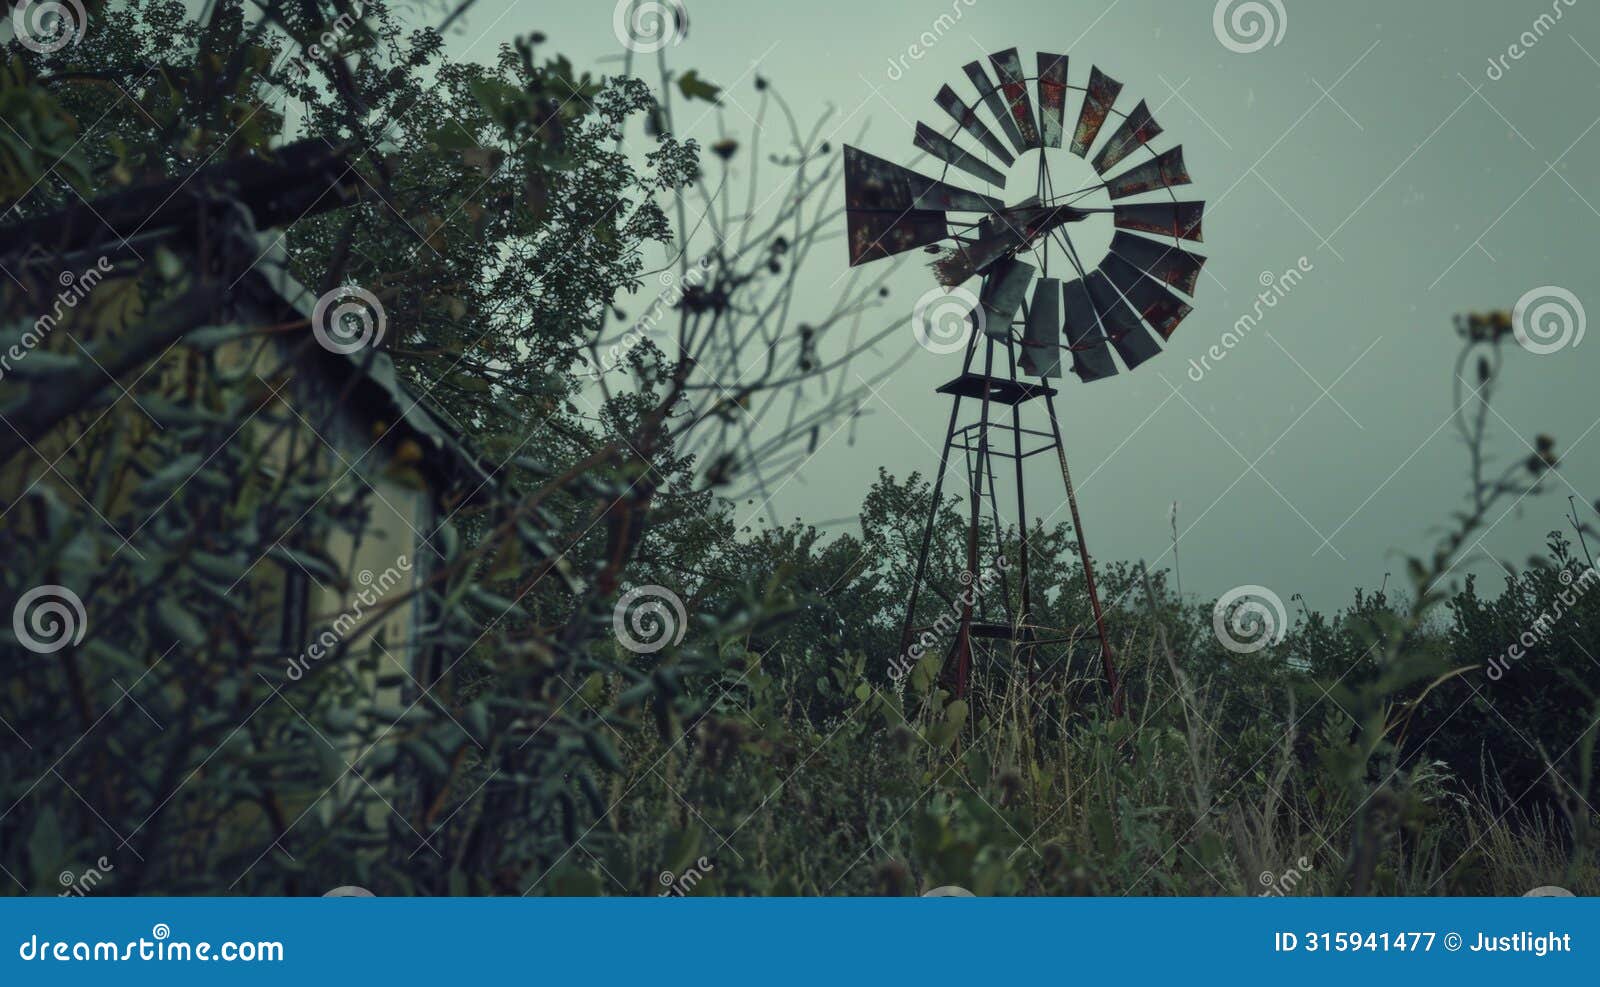 a weathered windmill creaking in the wind its rusted blades still turning as if beckoning travelers towards a cursed